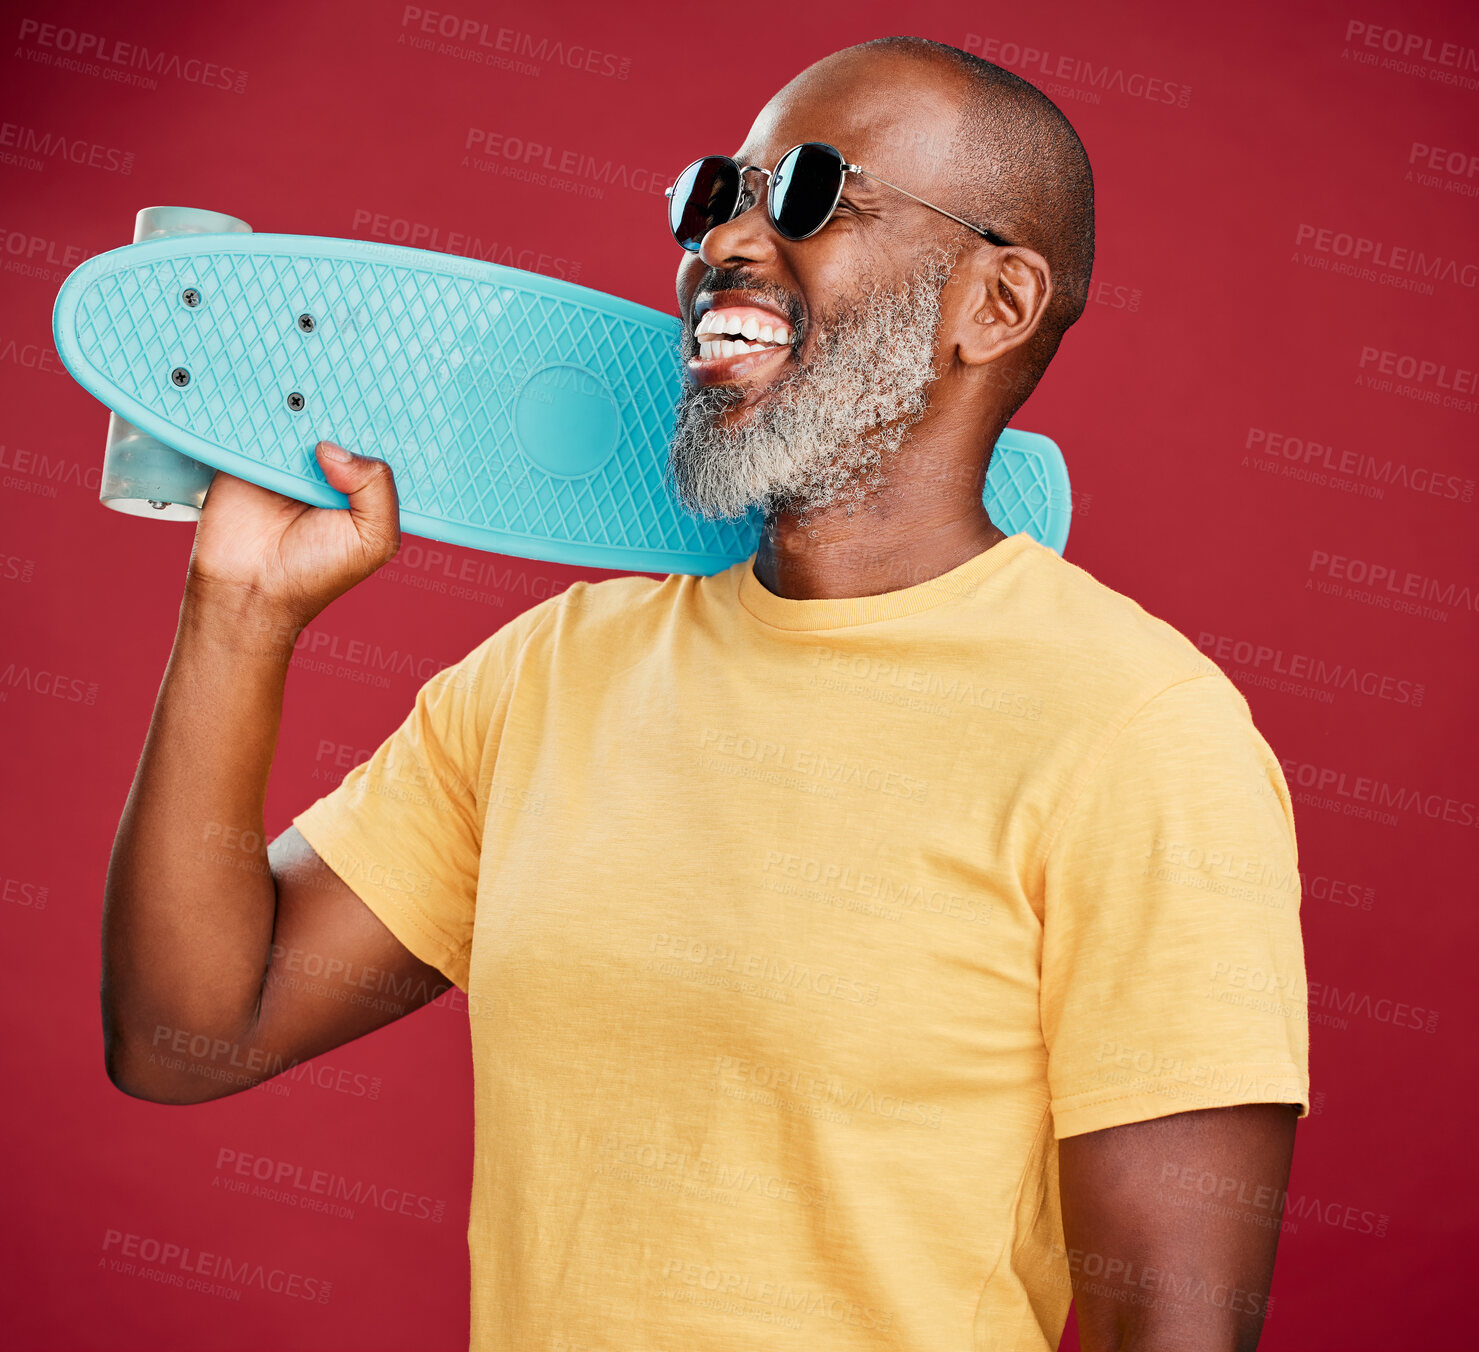 Buy stock photo Funky cool mature African American man isolated against a red background in a studio and posing with a skateboard. Smiling black man wearing sunglasses feeling youthful and energetic. Skating is fun